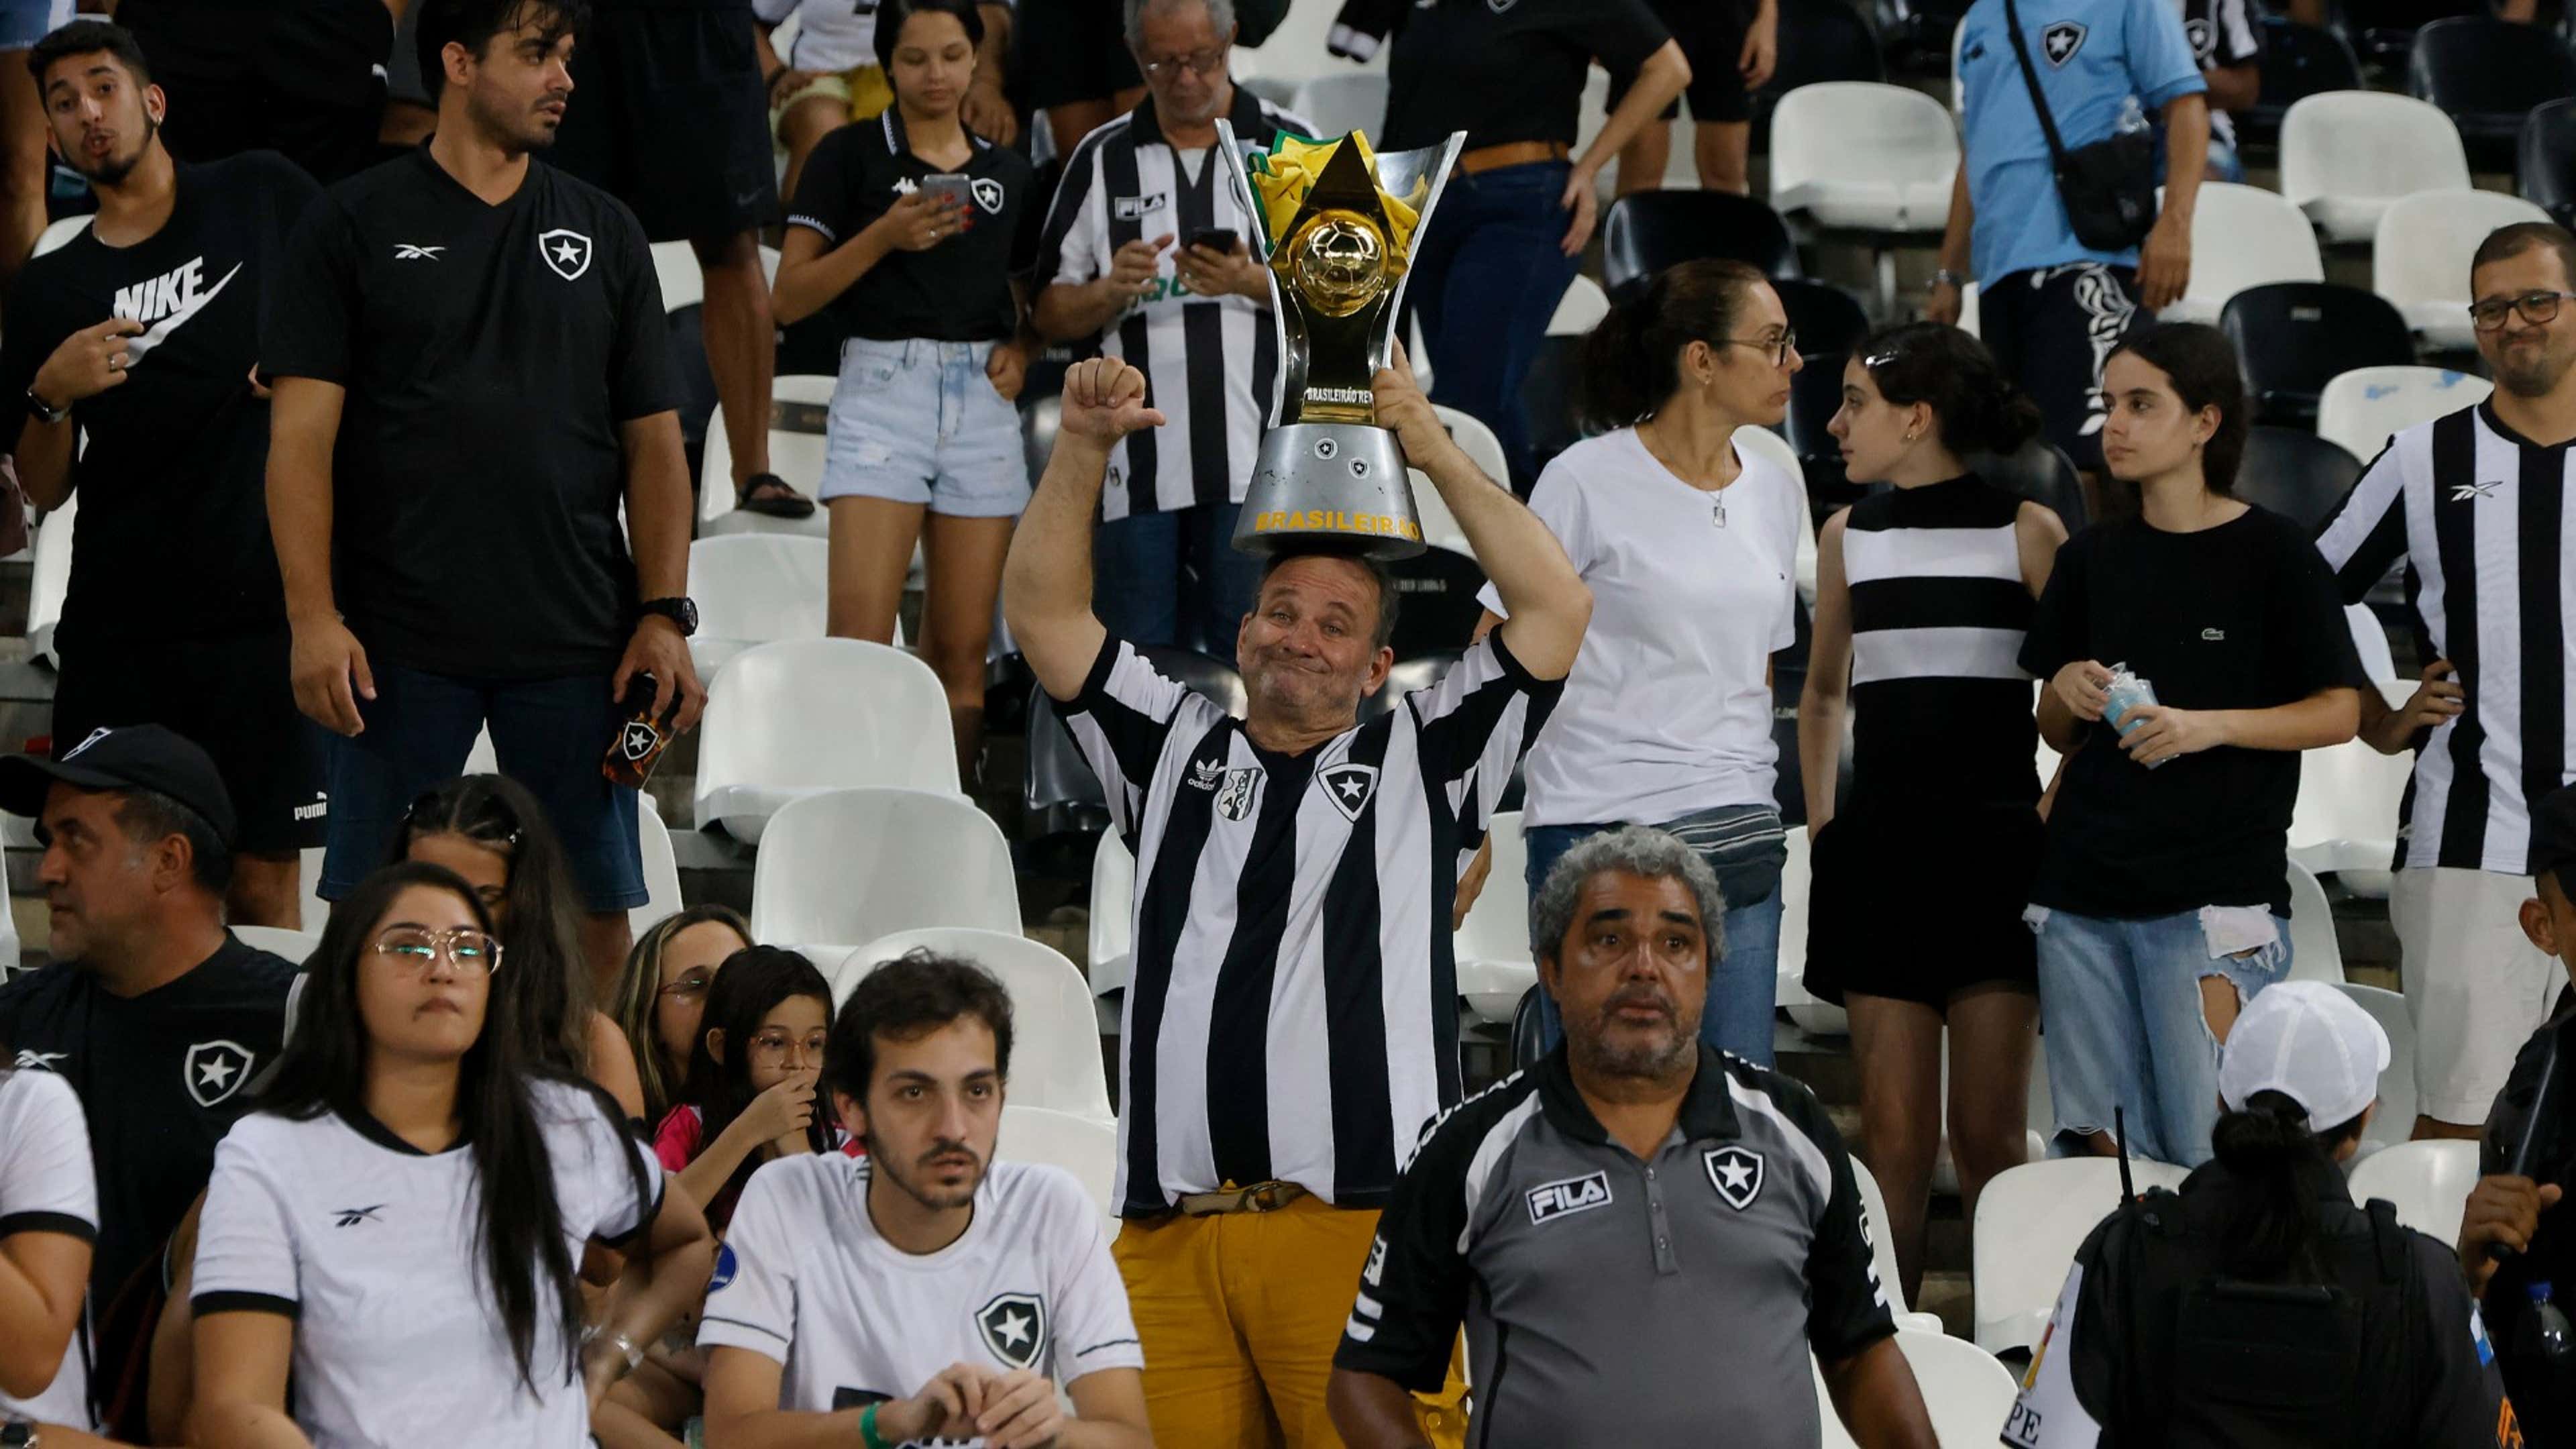 Brazil's Botafogo squanders a 13-point lead to lose national